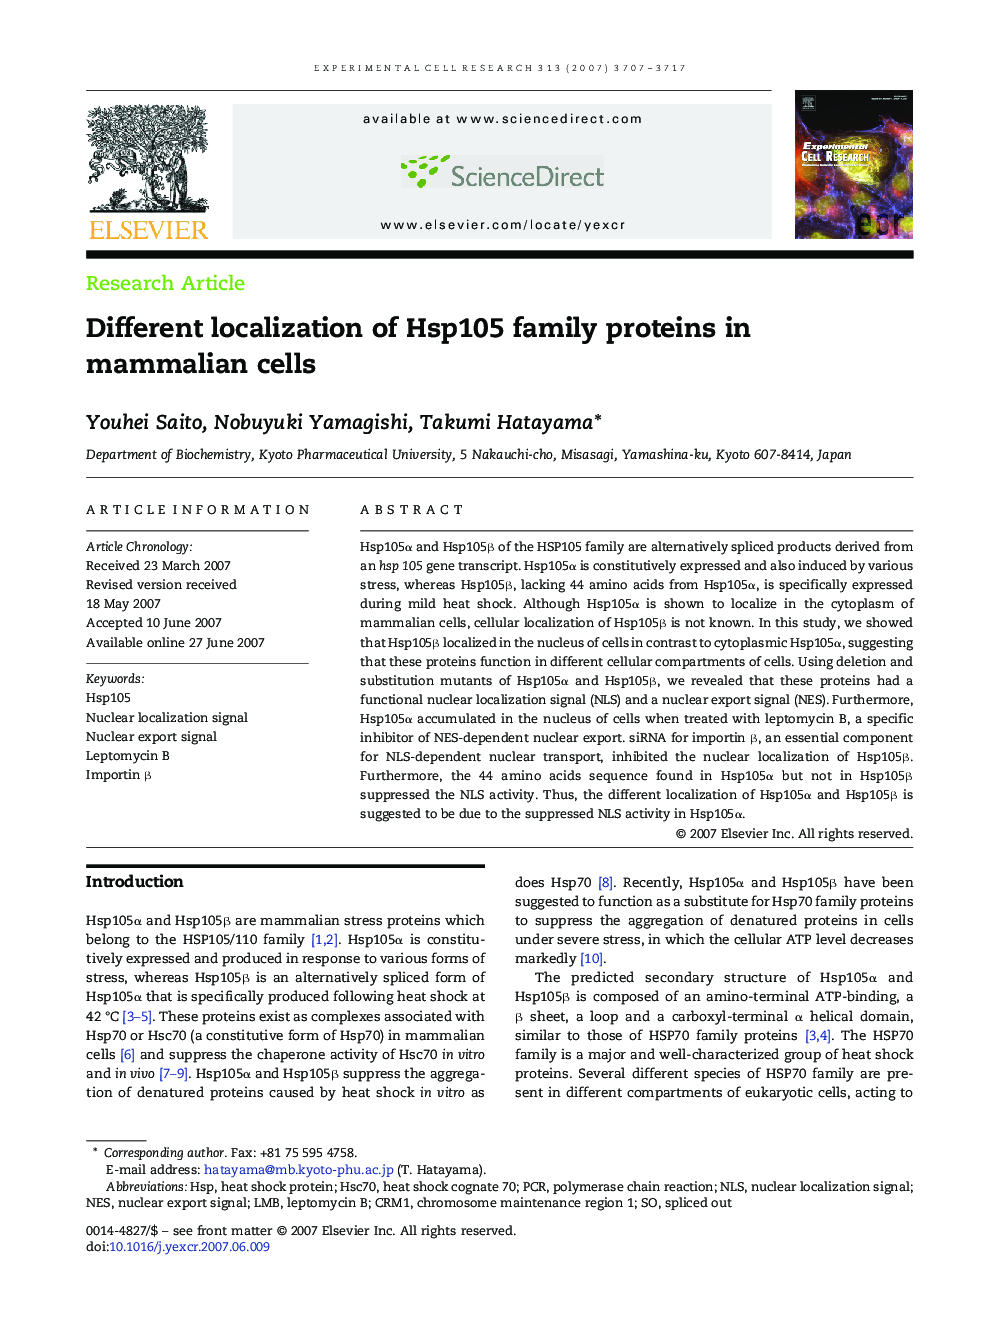 Different localization of Hsp105 family proteins in mammalian cells